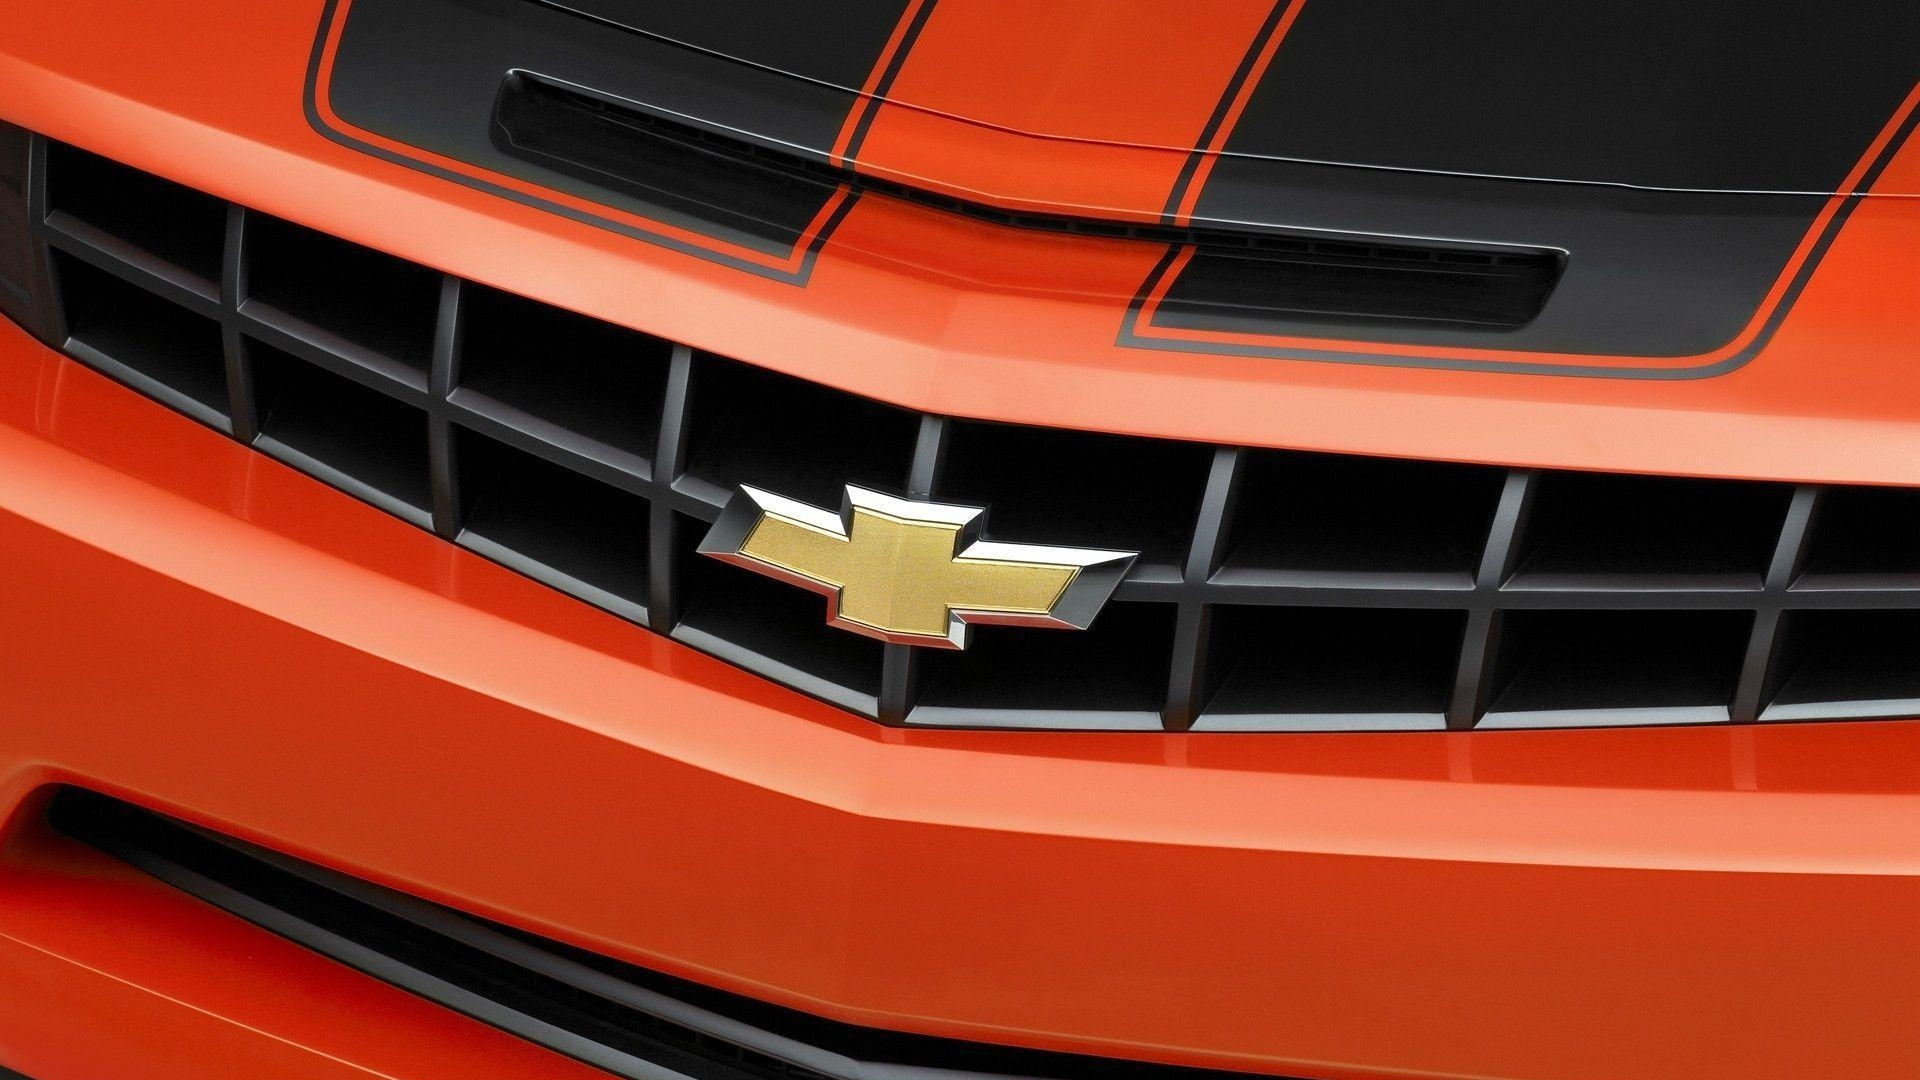 Cool Chevy Logos Wallpapers Wallpapers